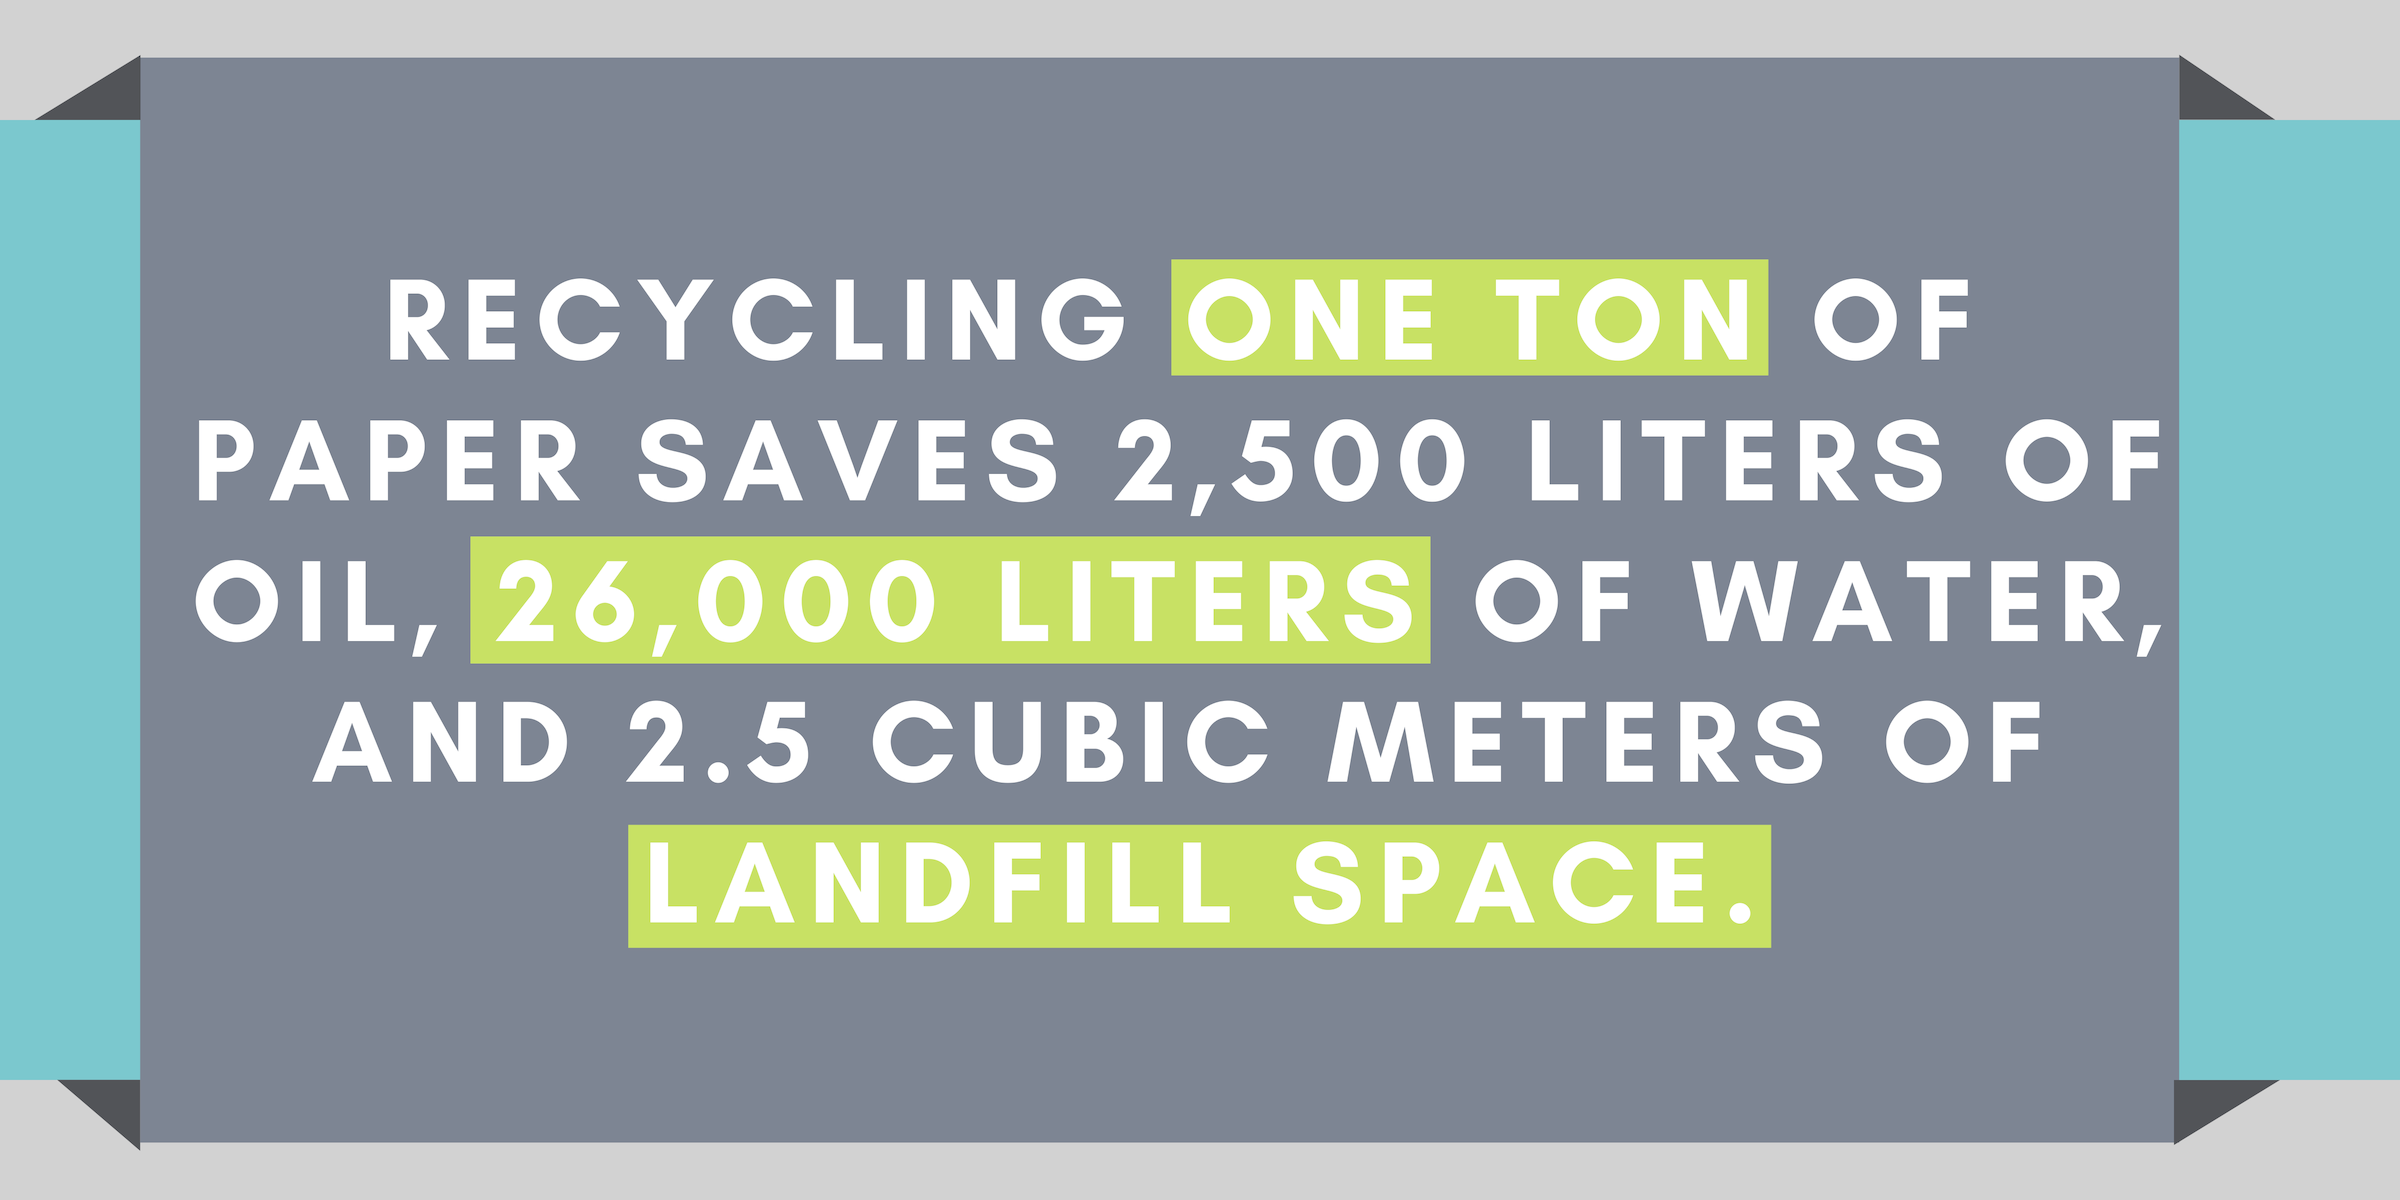 Recycling one ton of paper saves 2,500 liters of oil, 26,000 liters of water, and 2.5 cubic meters of landfill space.